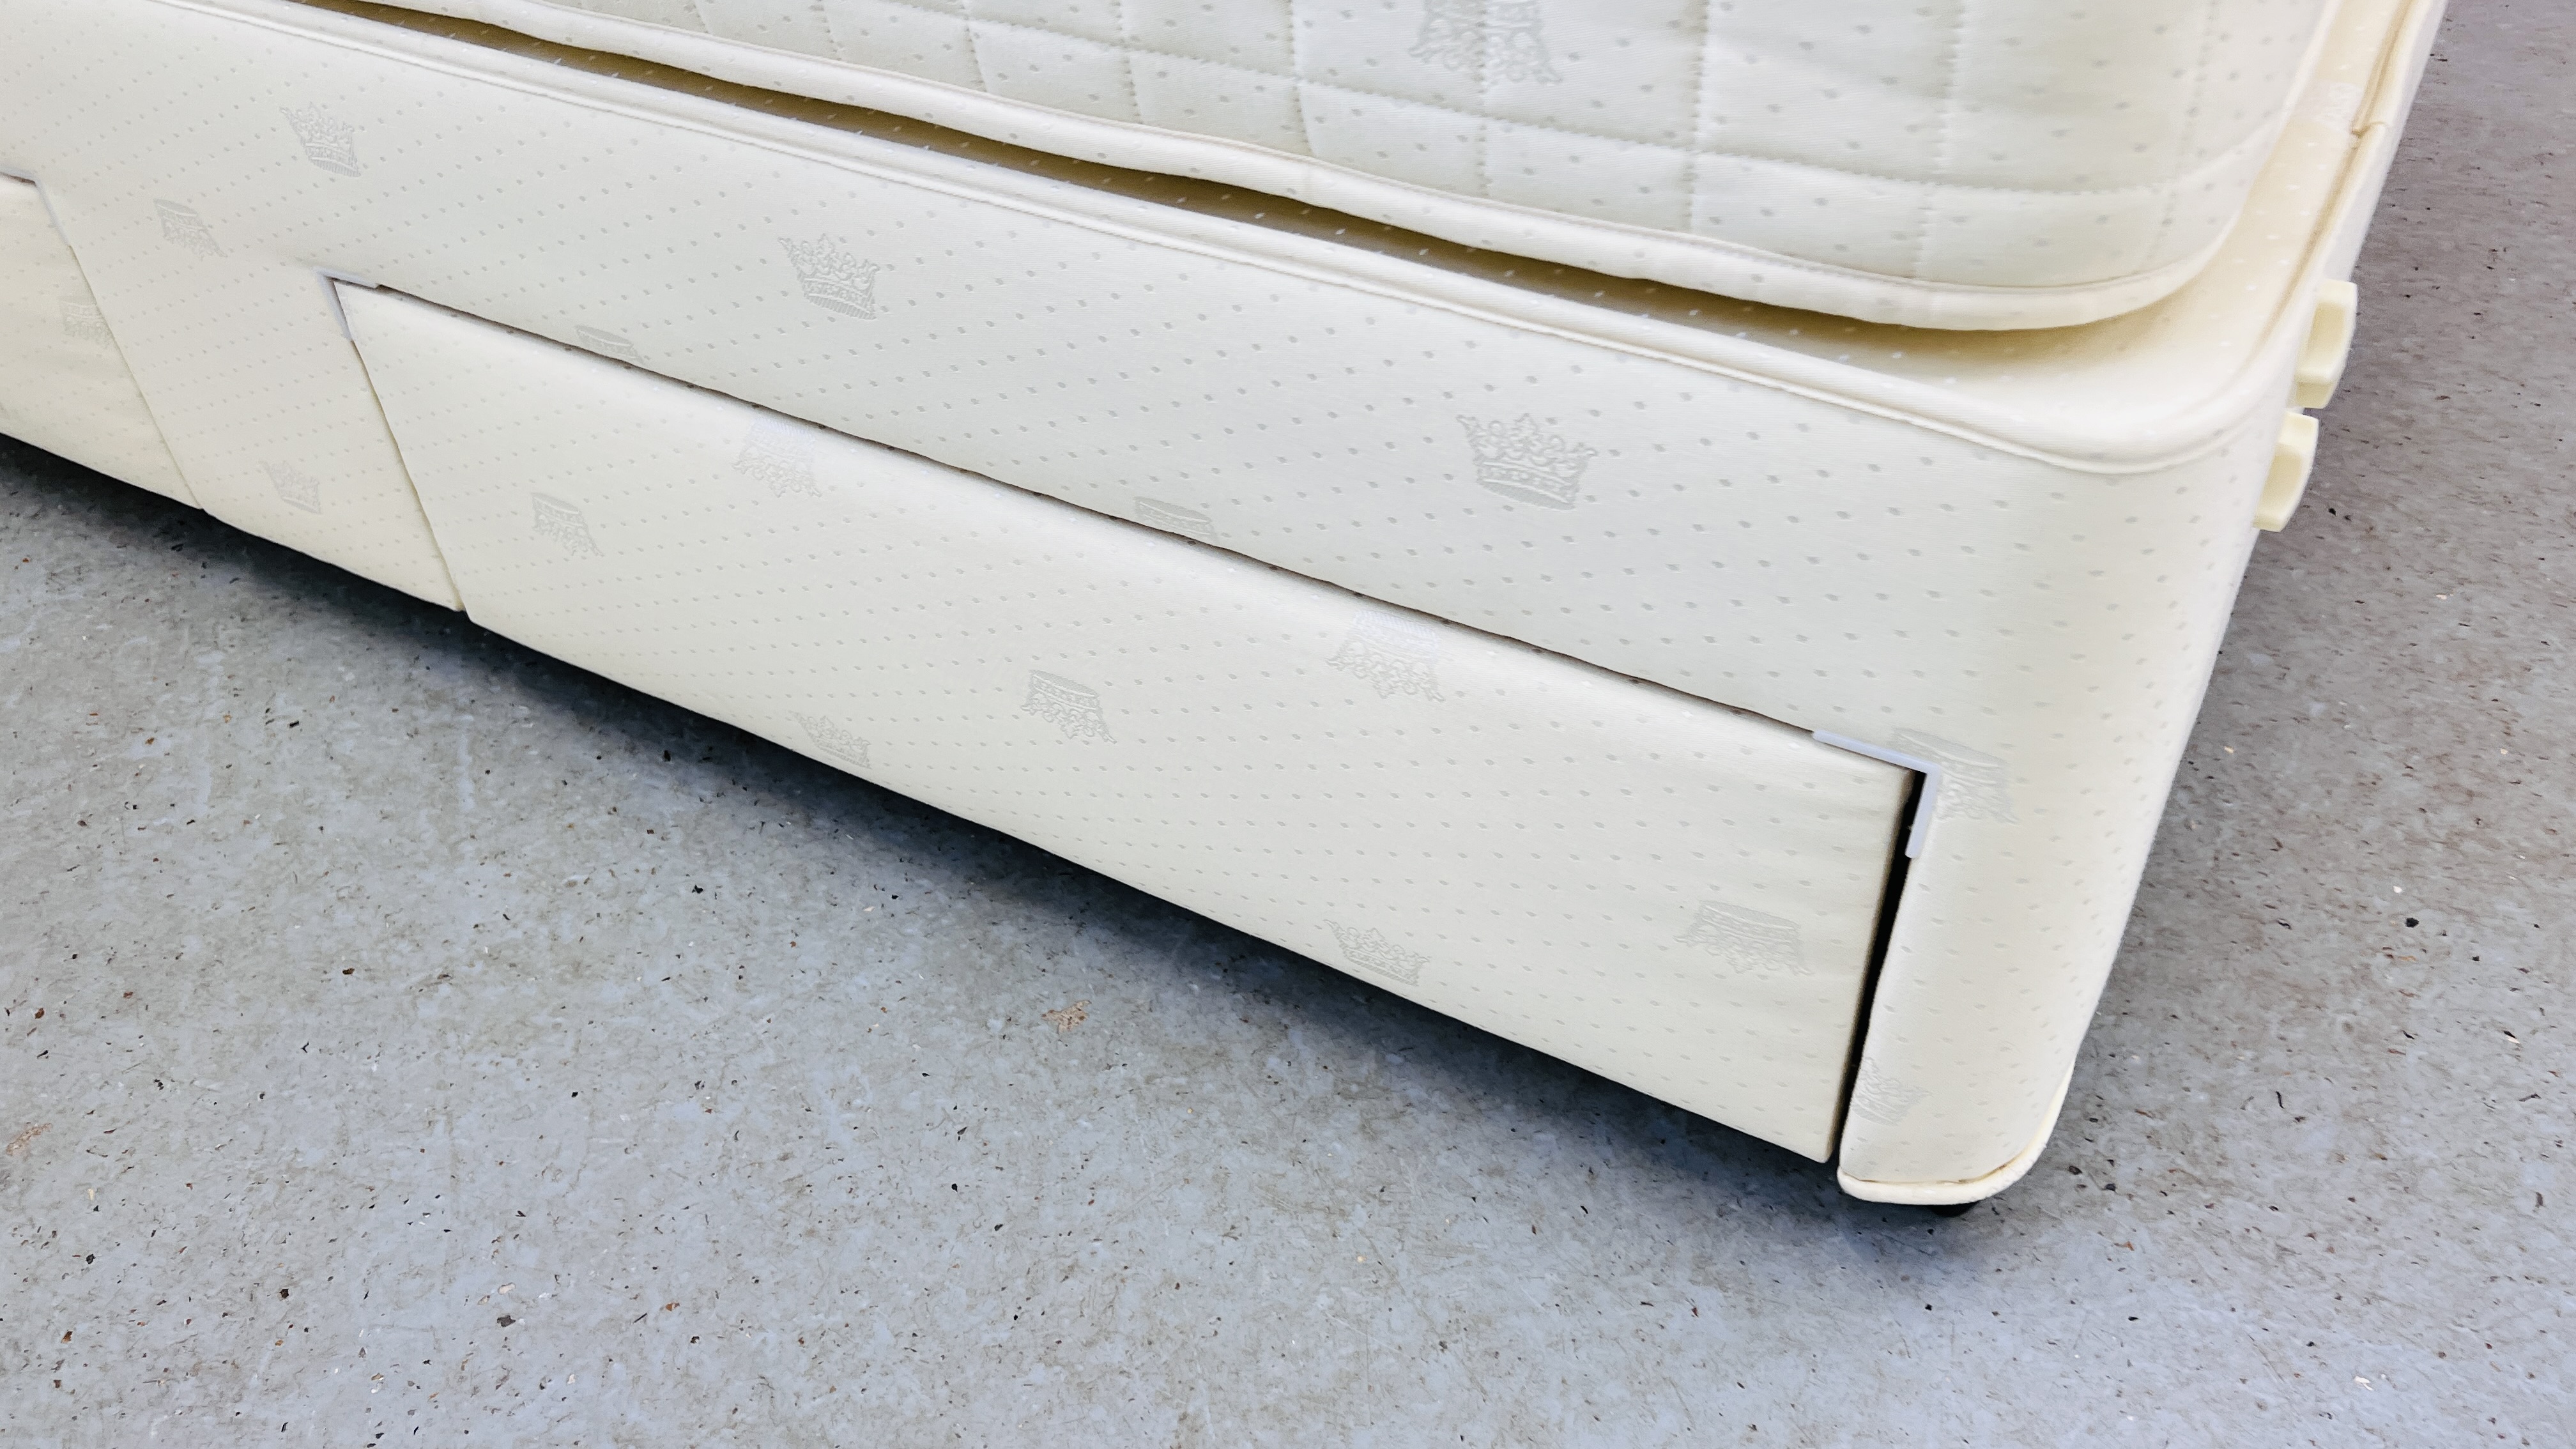 A GAINSBOROUGH LUXURY BED OLYMPIC SINGLE MATTRESS ON TWO DRAWER MATCHING BASE - Image 10 of 14